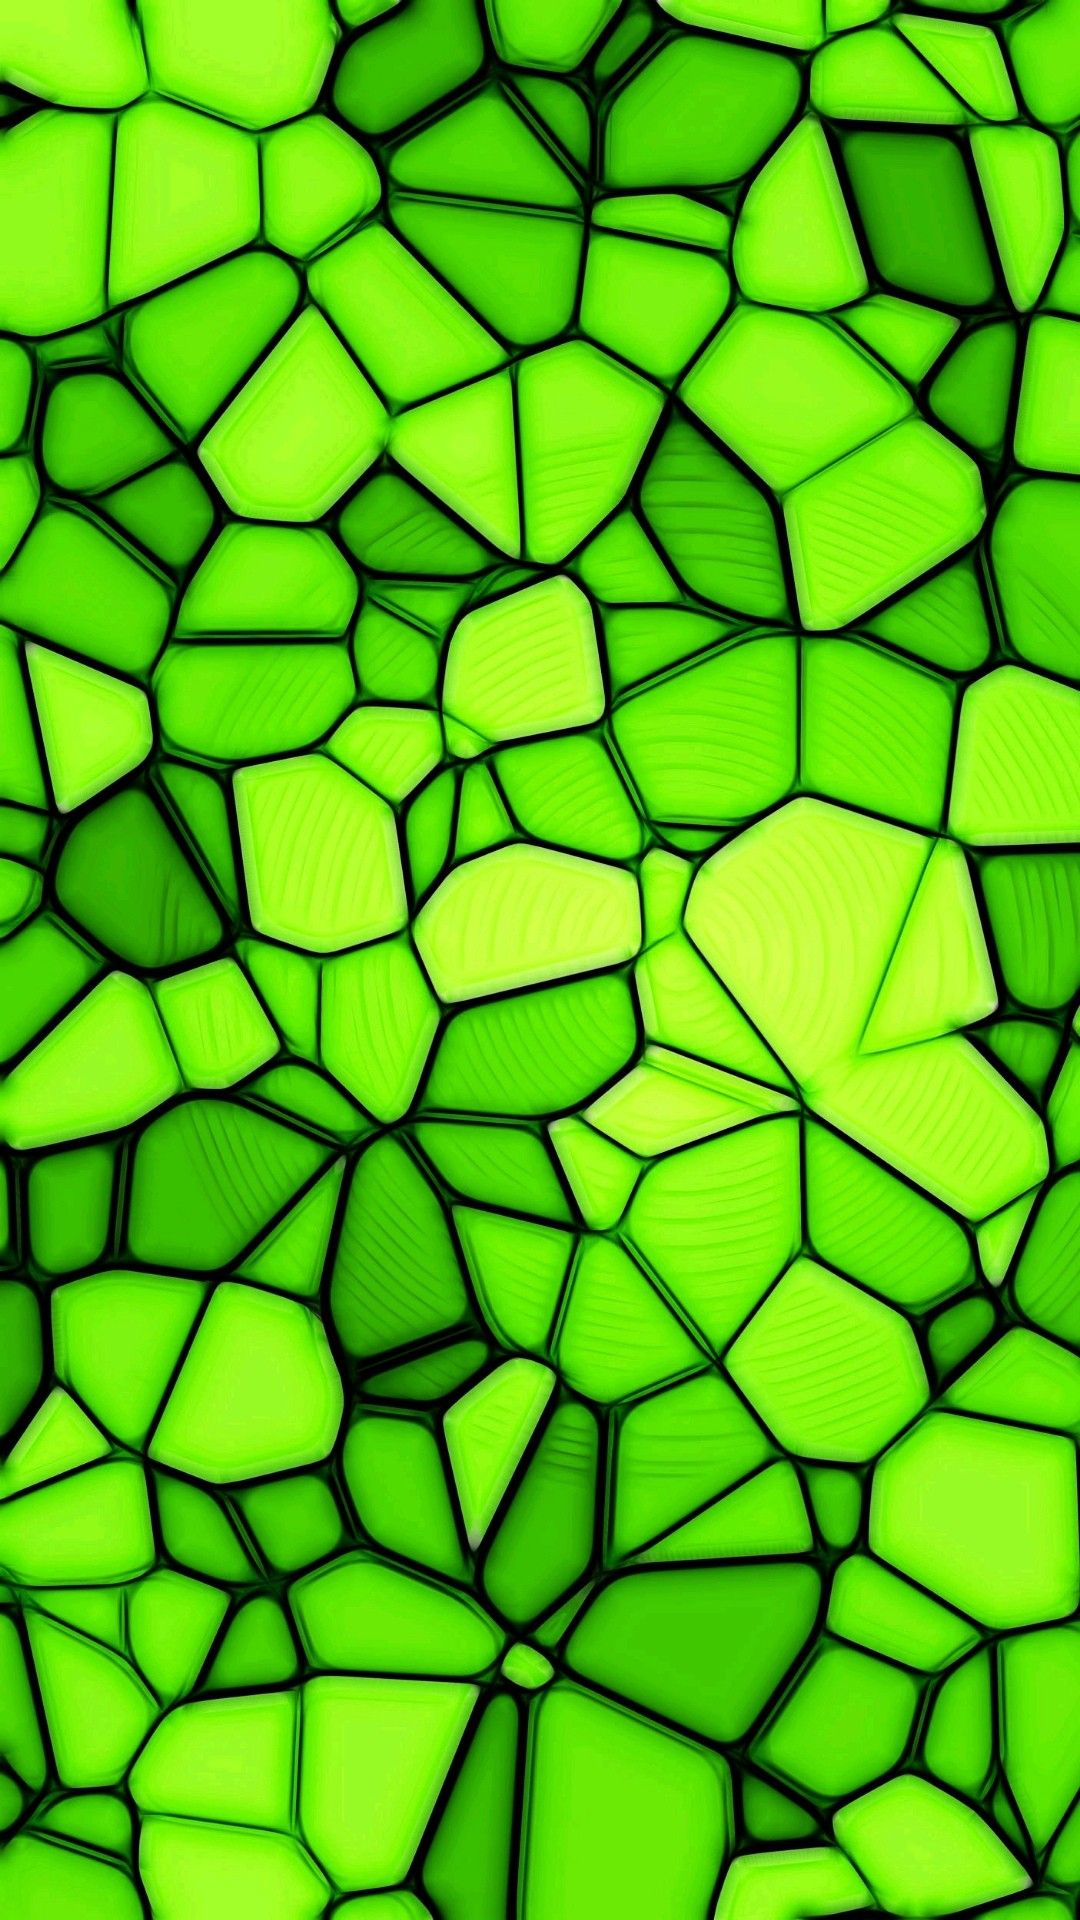 HD Green Wallpaper for Mobile with Abstract Stone Art Surface Wallpaper. Wallpaper Download. High Resolution Wallpaper